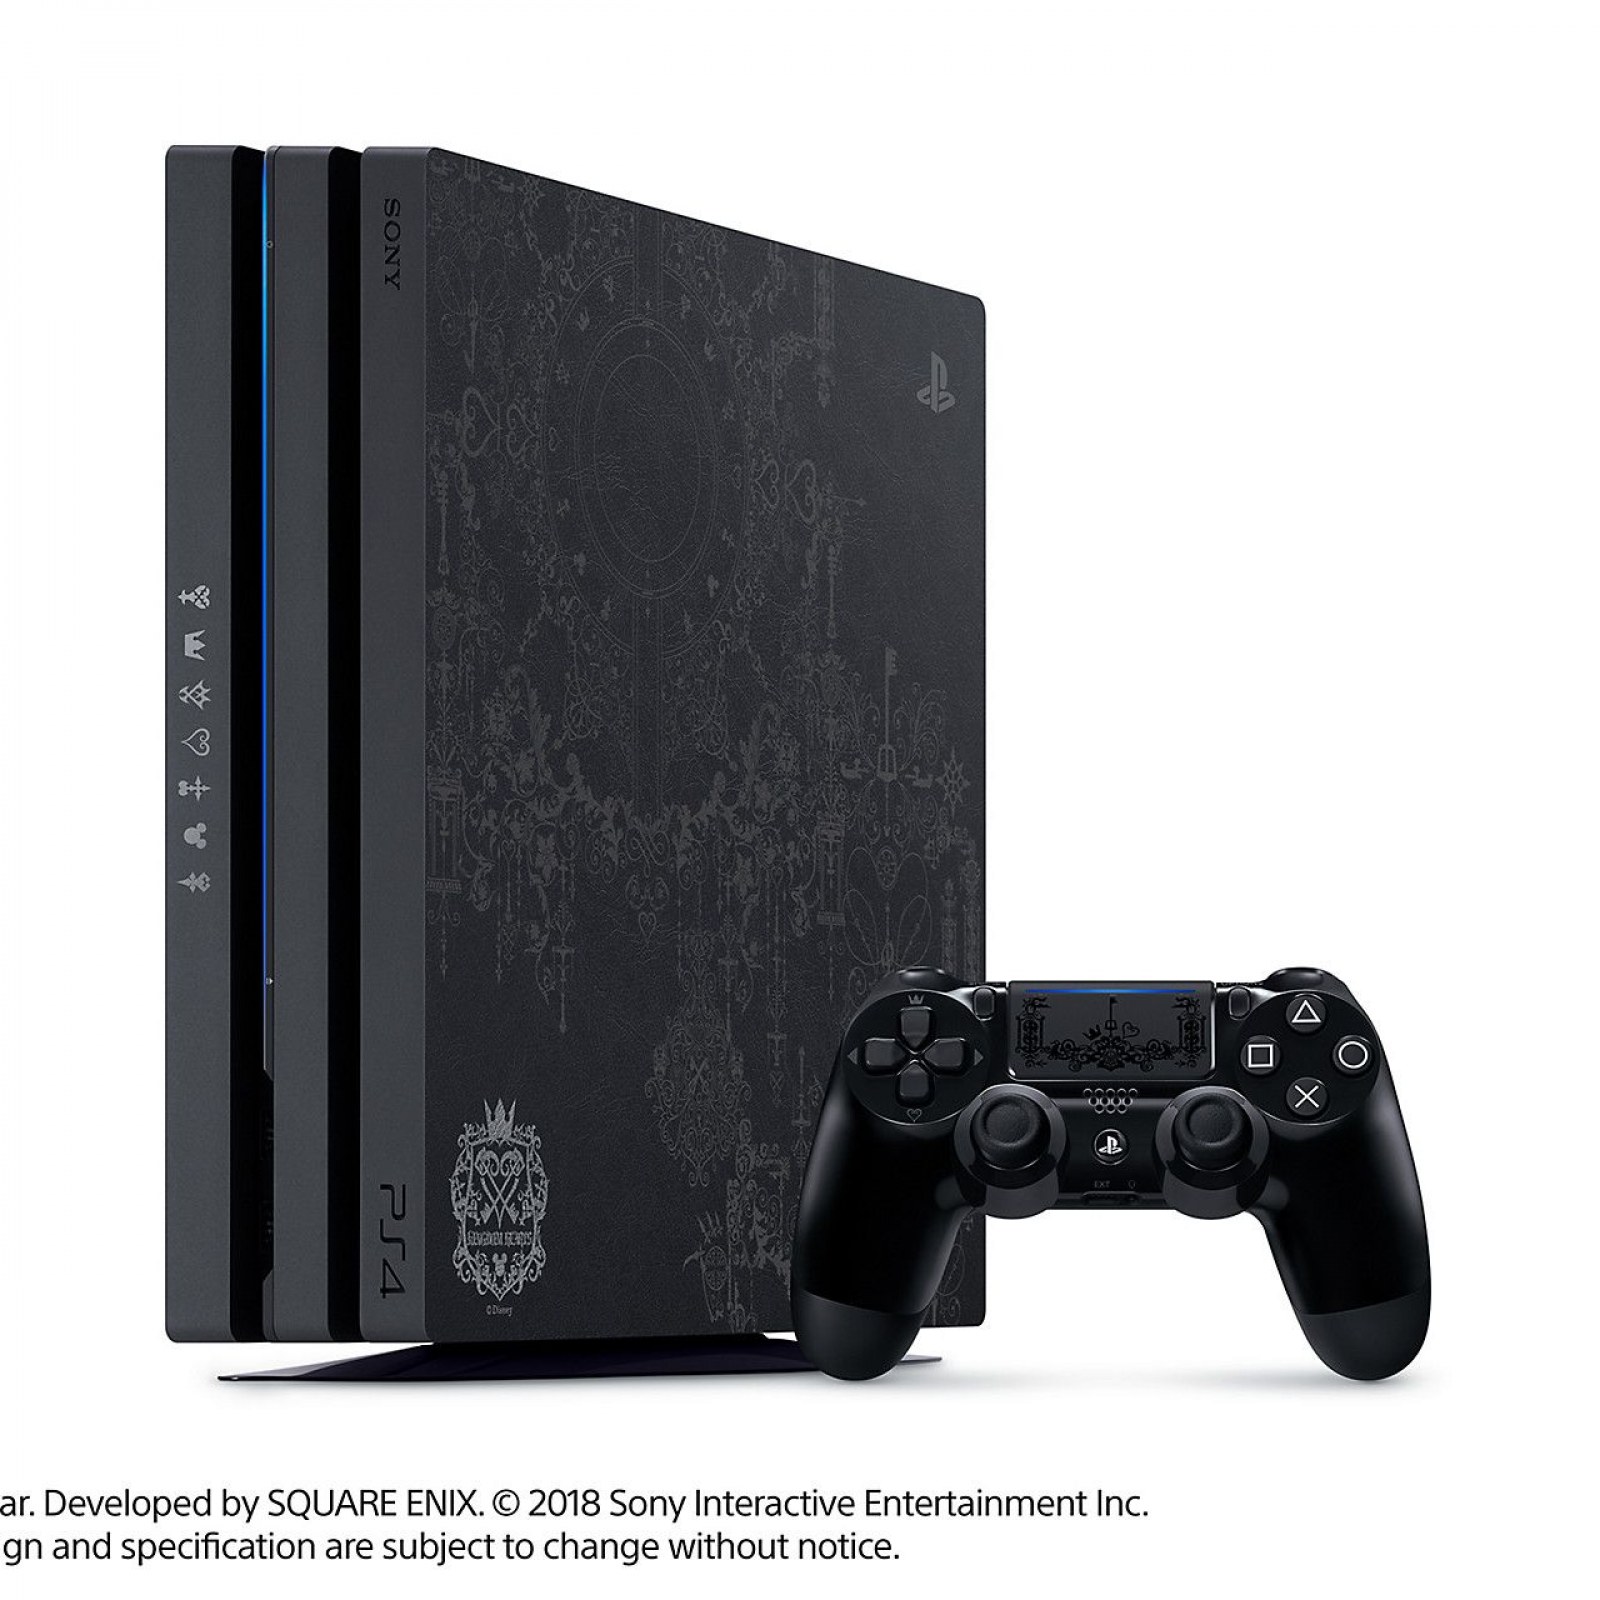 Kingdom Hearts 3' PS4 Pro Bundle Pre-Orders Live - Where to Buy the  Limited-Edition Console